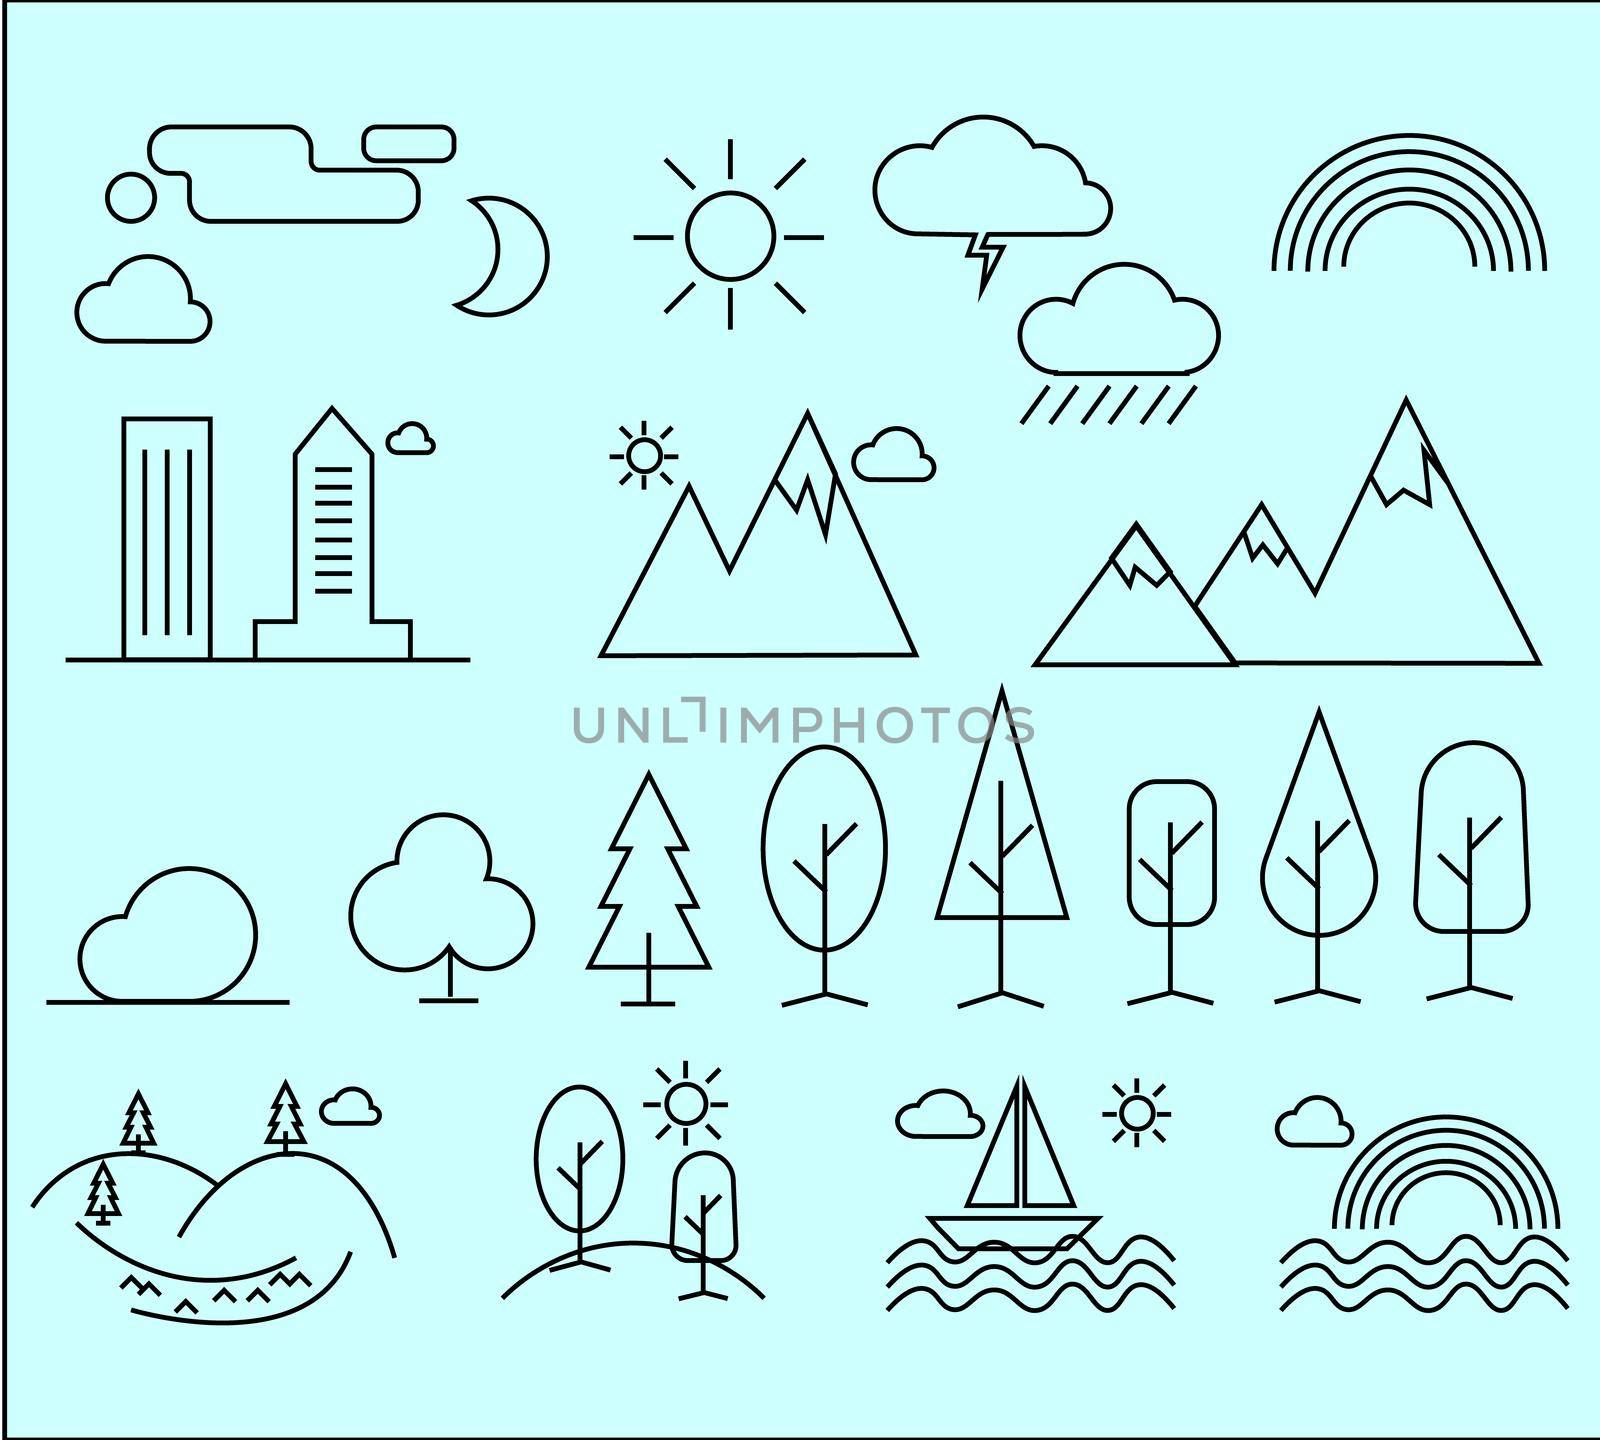 Landscape icons, thin line style, flat design by Alxyzt